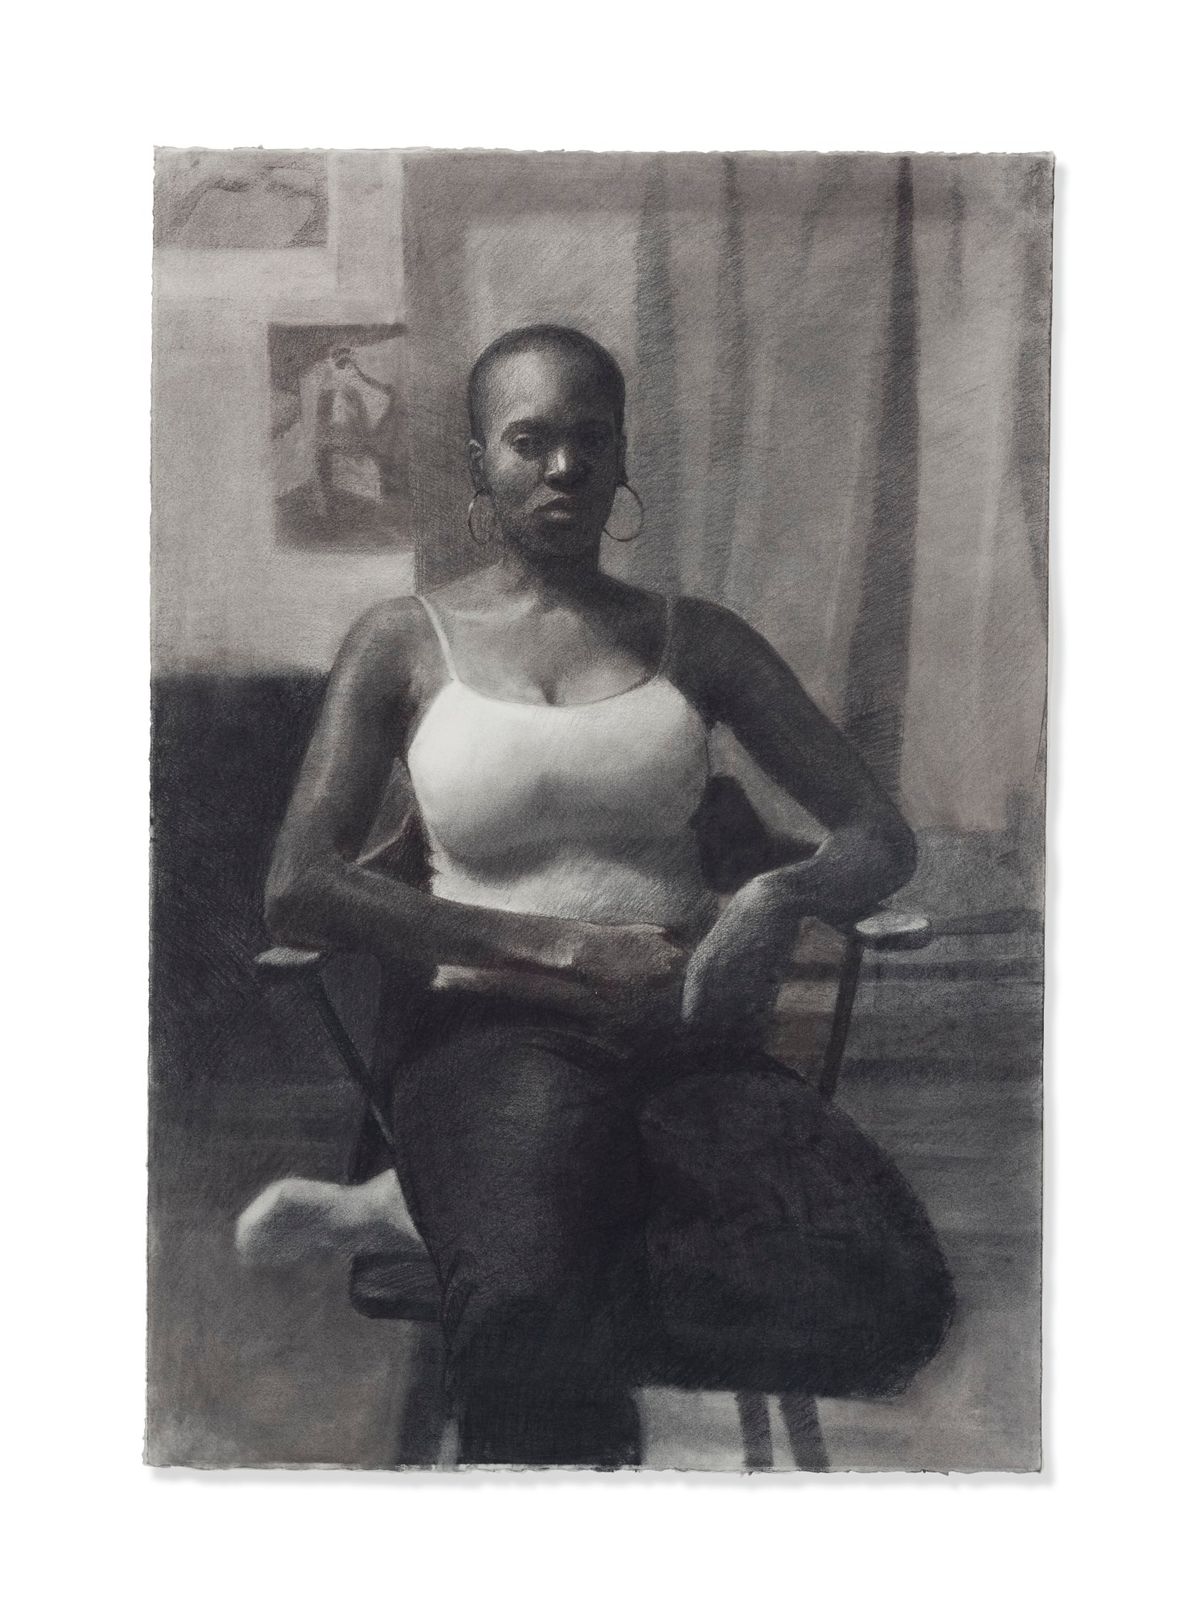 Veiled Sorrow (around 2008), a charcoal on paper work by Njideka Akunyili Crosby, is estimated at £120,000–£180,000 in Christie's Post-War to Present auction Christie's